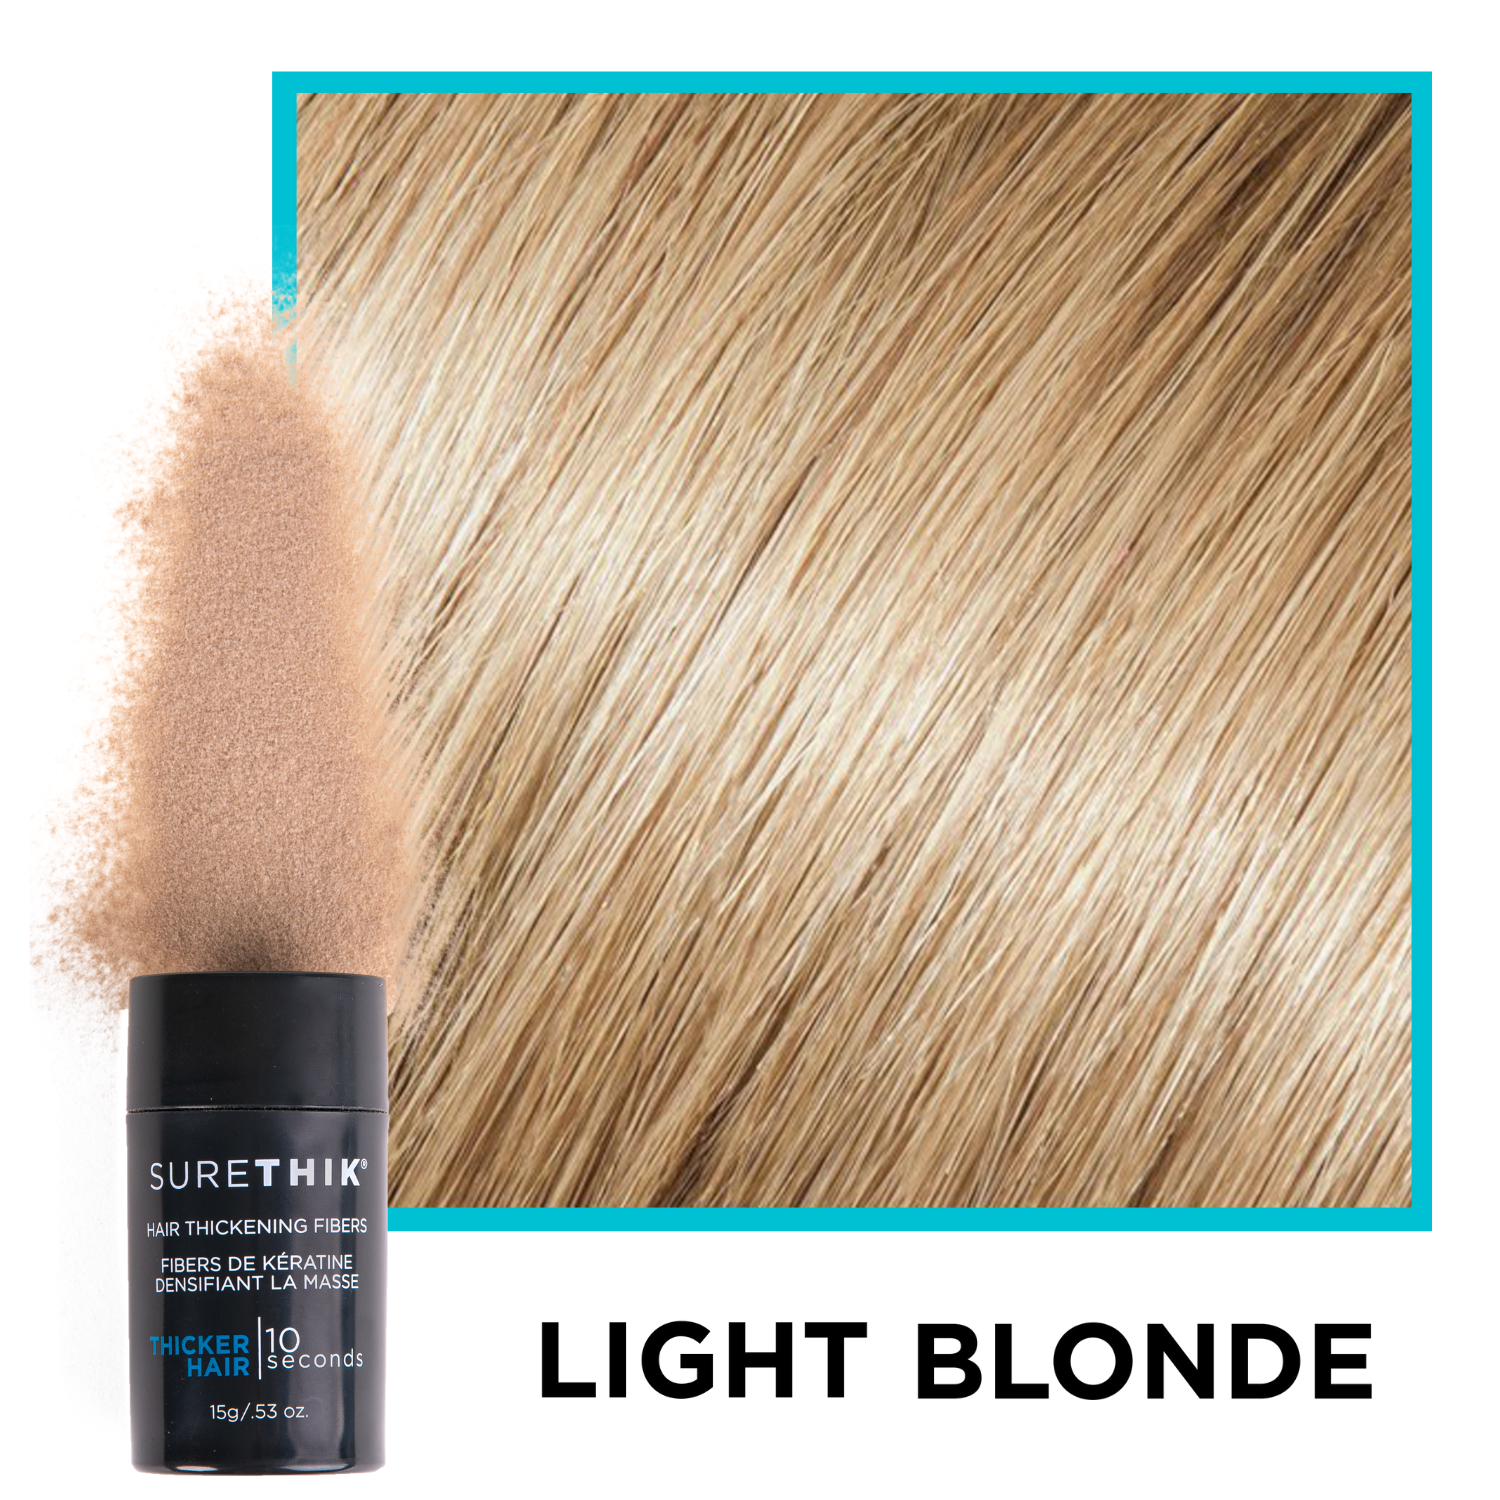 Hair Thickening Fibers (15g / 0.53oz) - Limited Time Offer